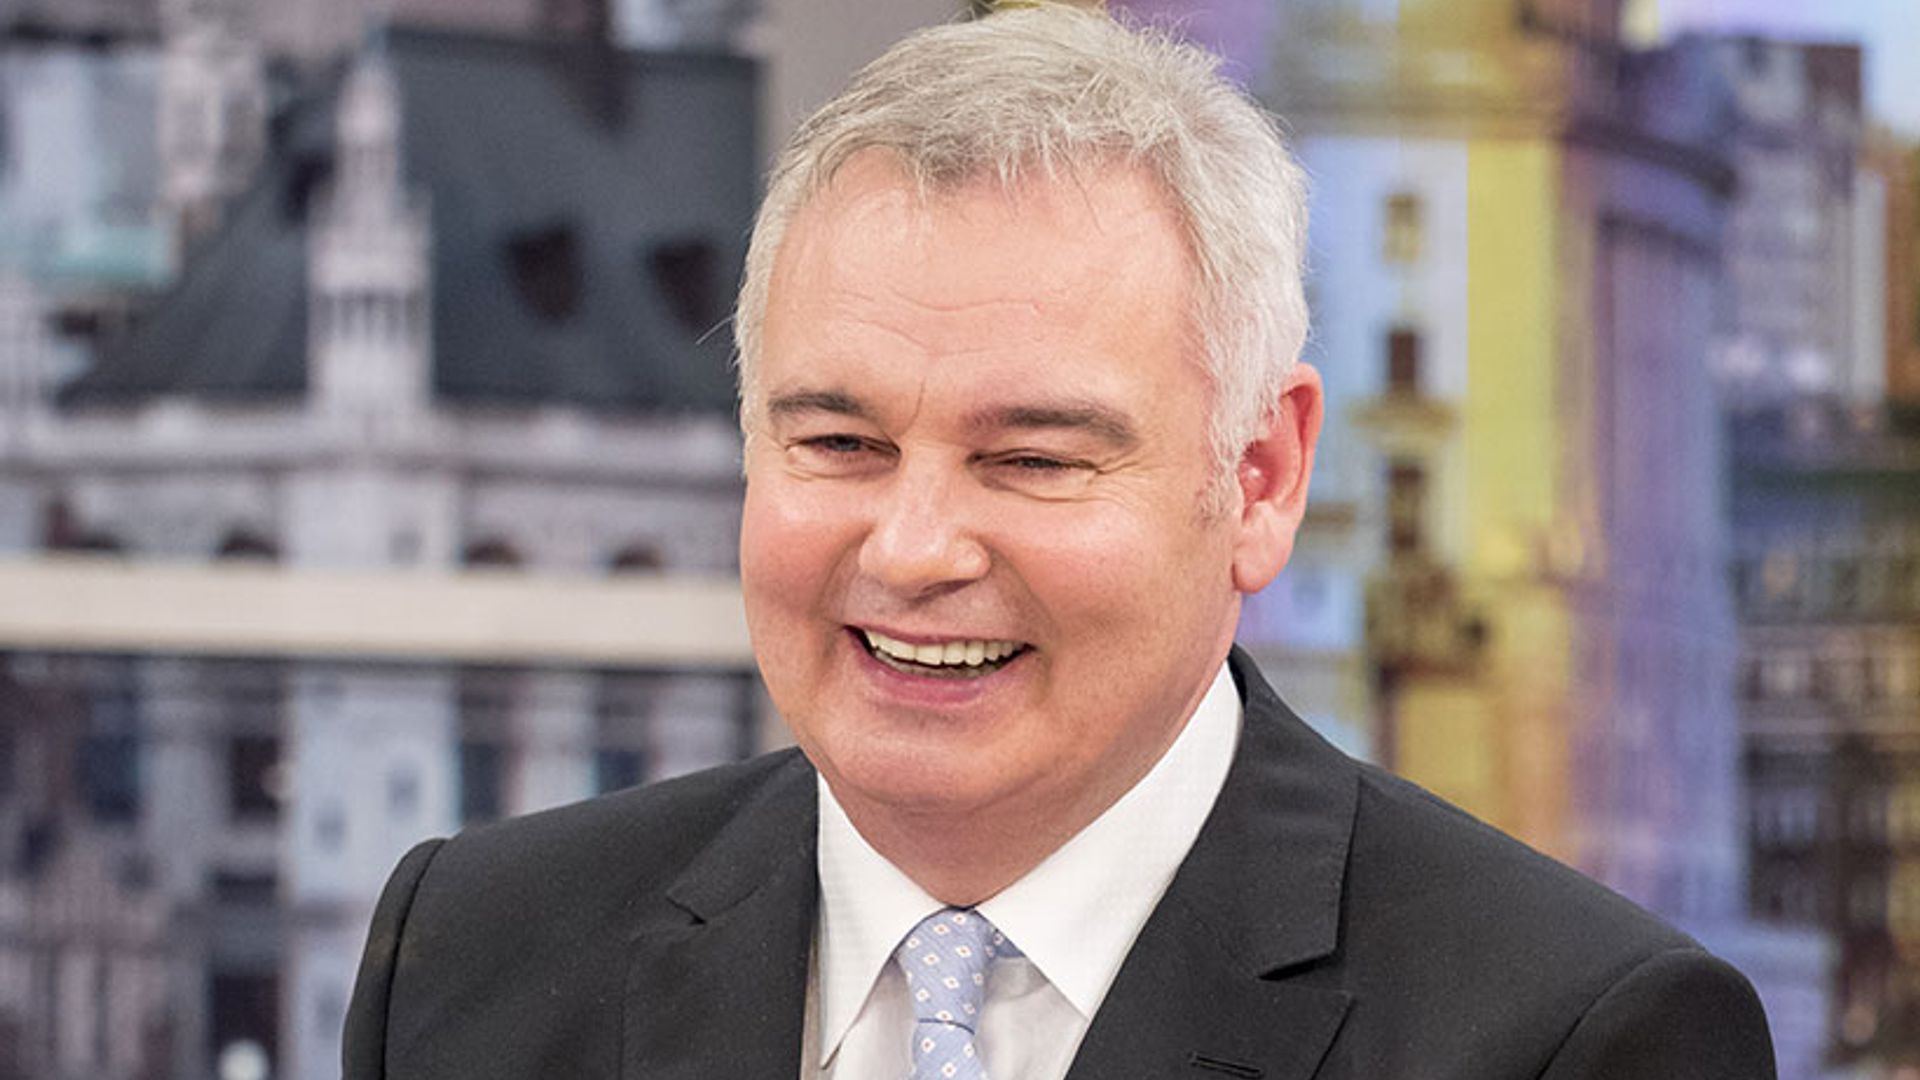 Eamonn Holmes to replace Piers Morgan on Good Morning Britain?